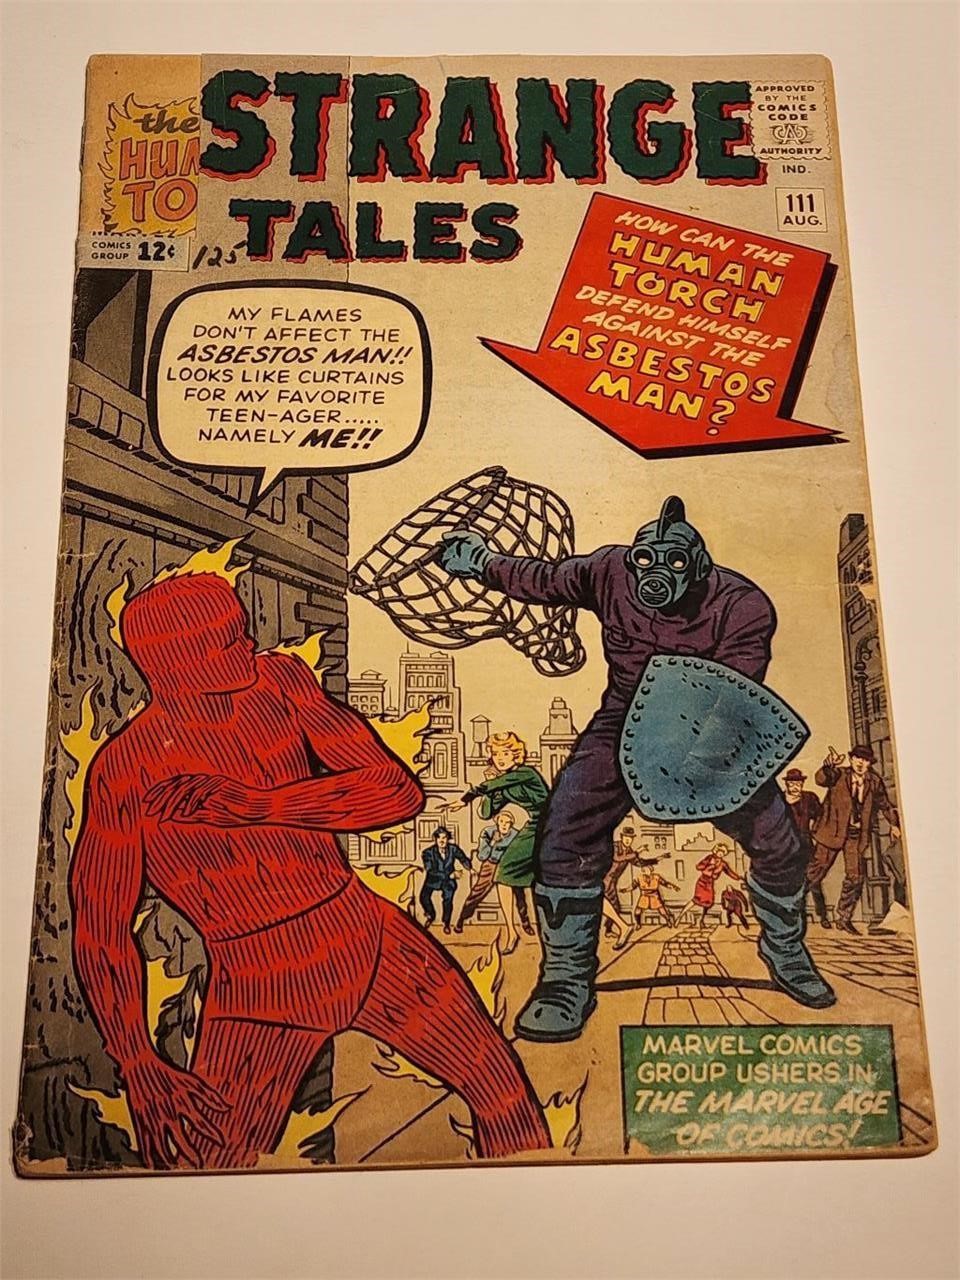 AND SOLD IT COMIC AUCTION #186 5/11/24